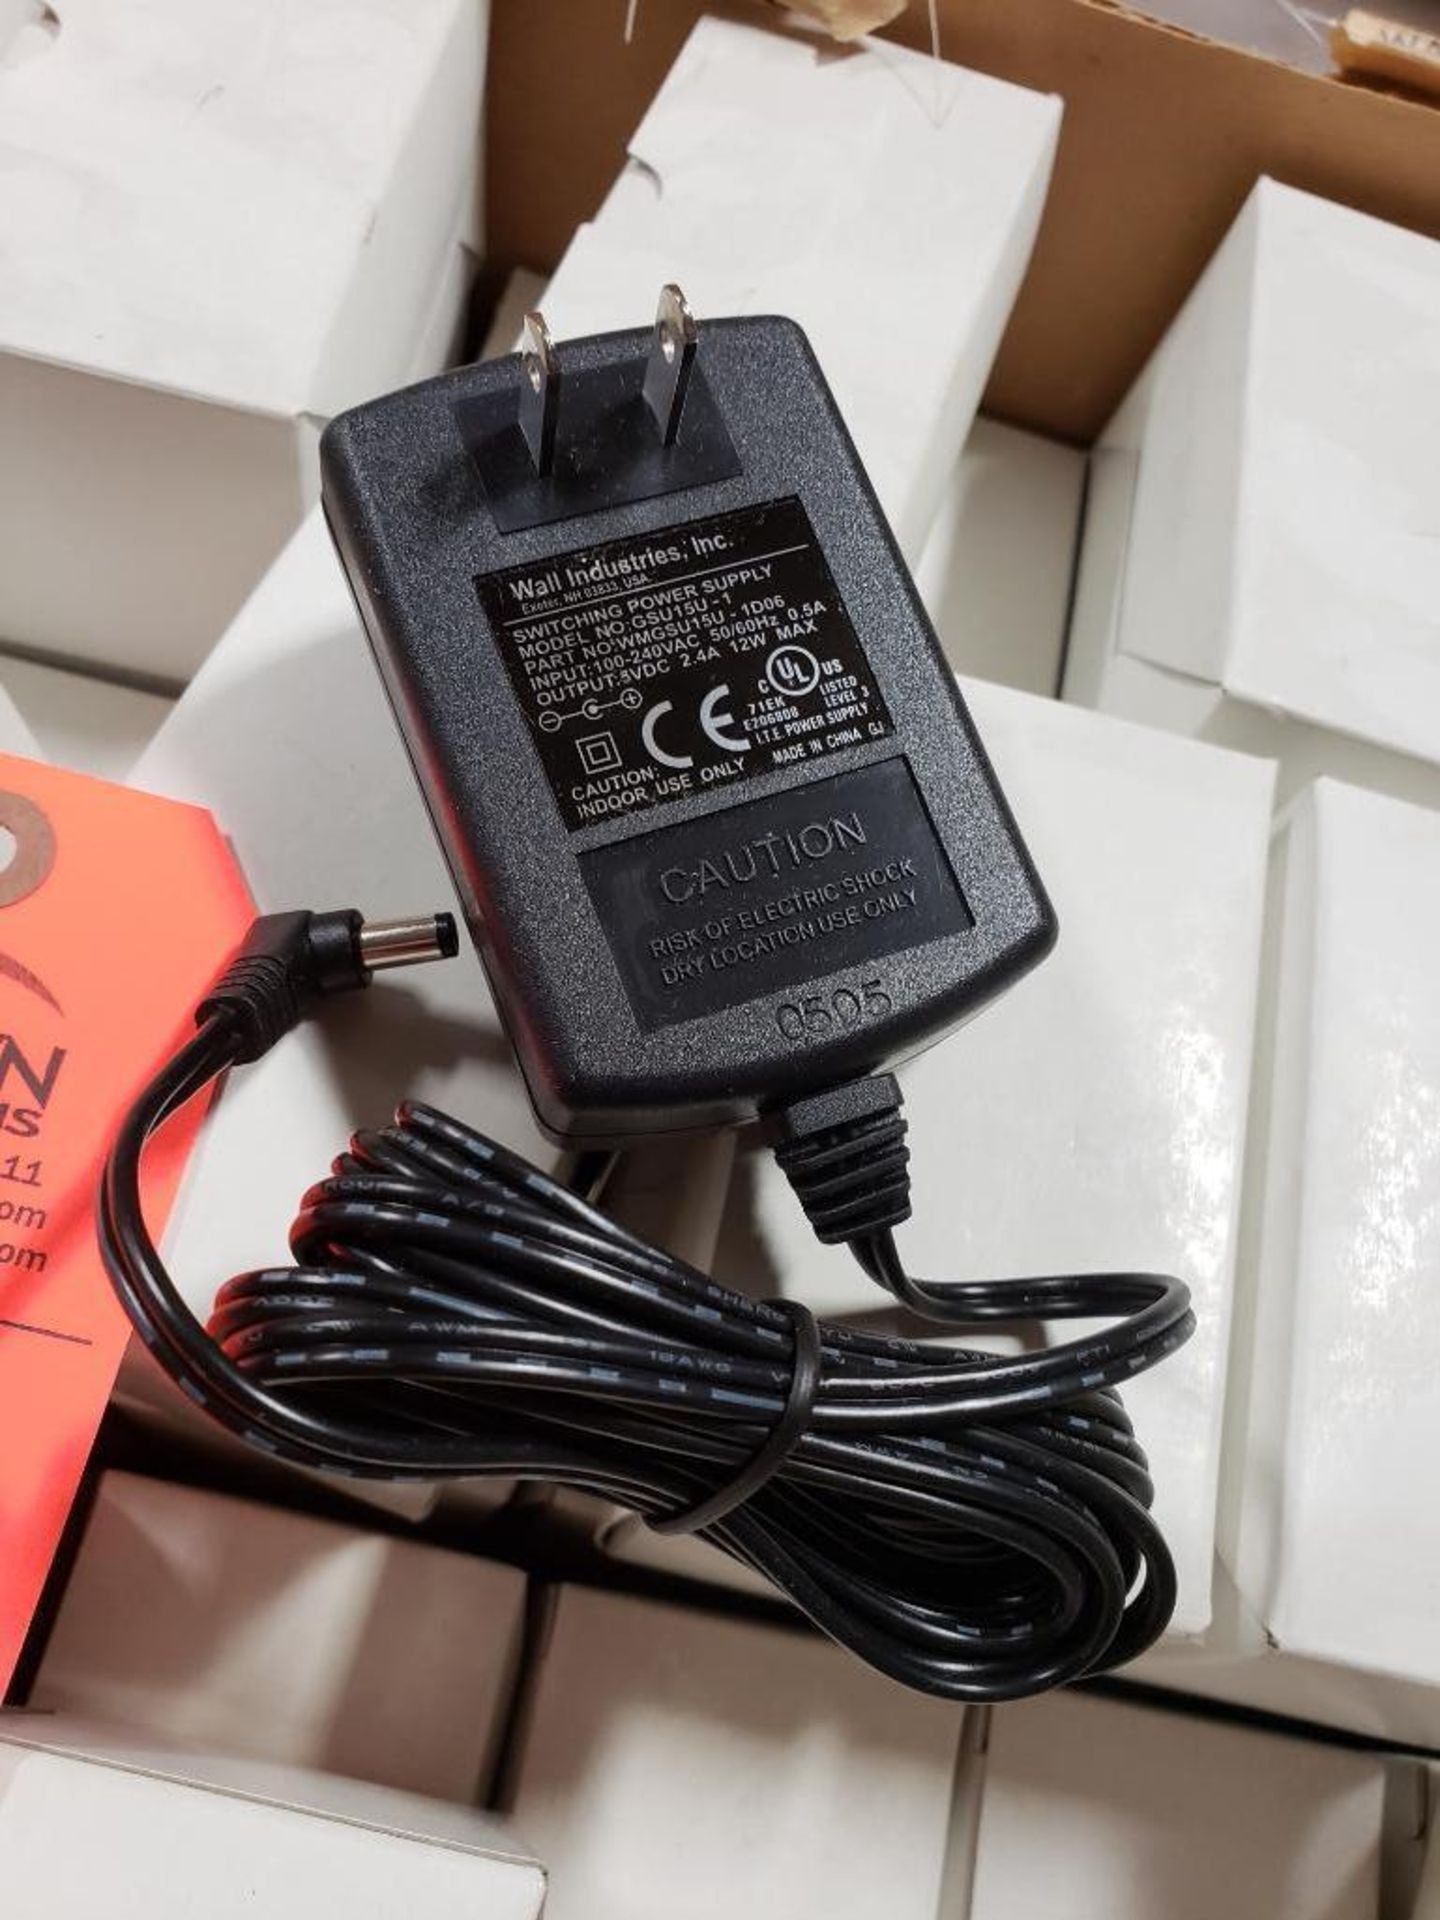 Qty 70 - Wall Industries switching power supply model GSU15U-1. New in boxes. - Image 2 of 4